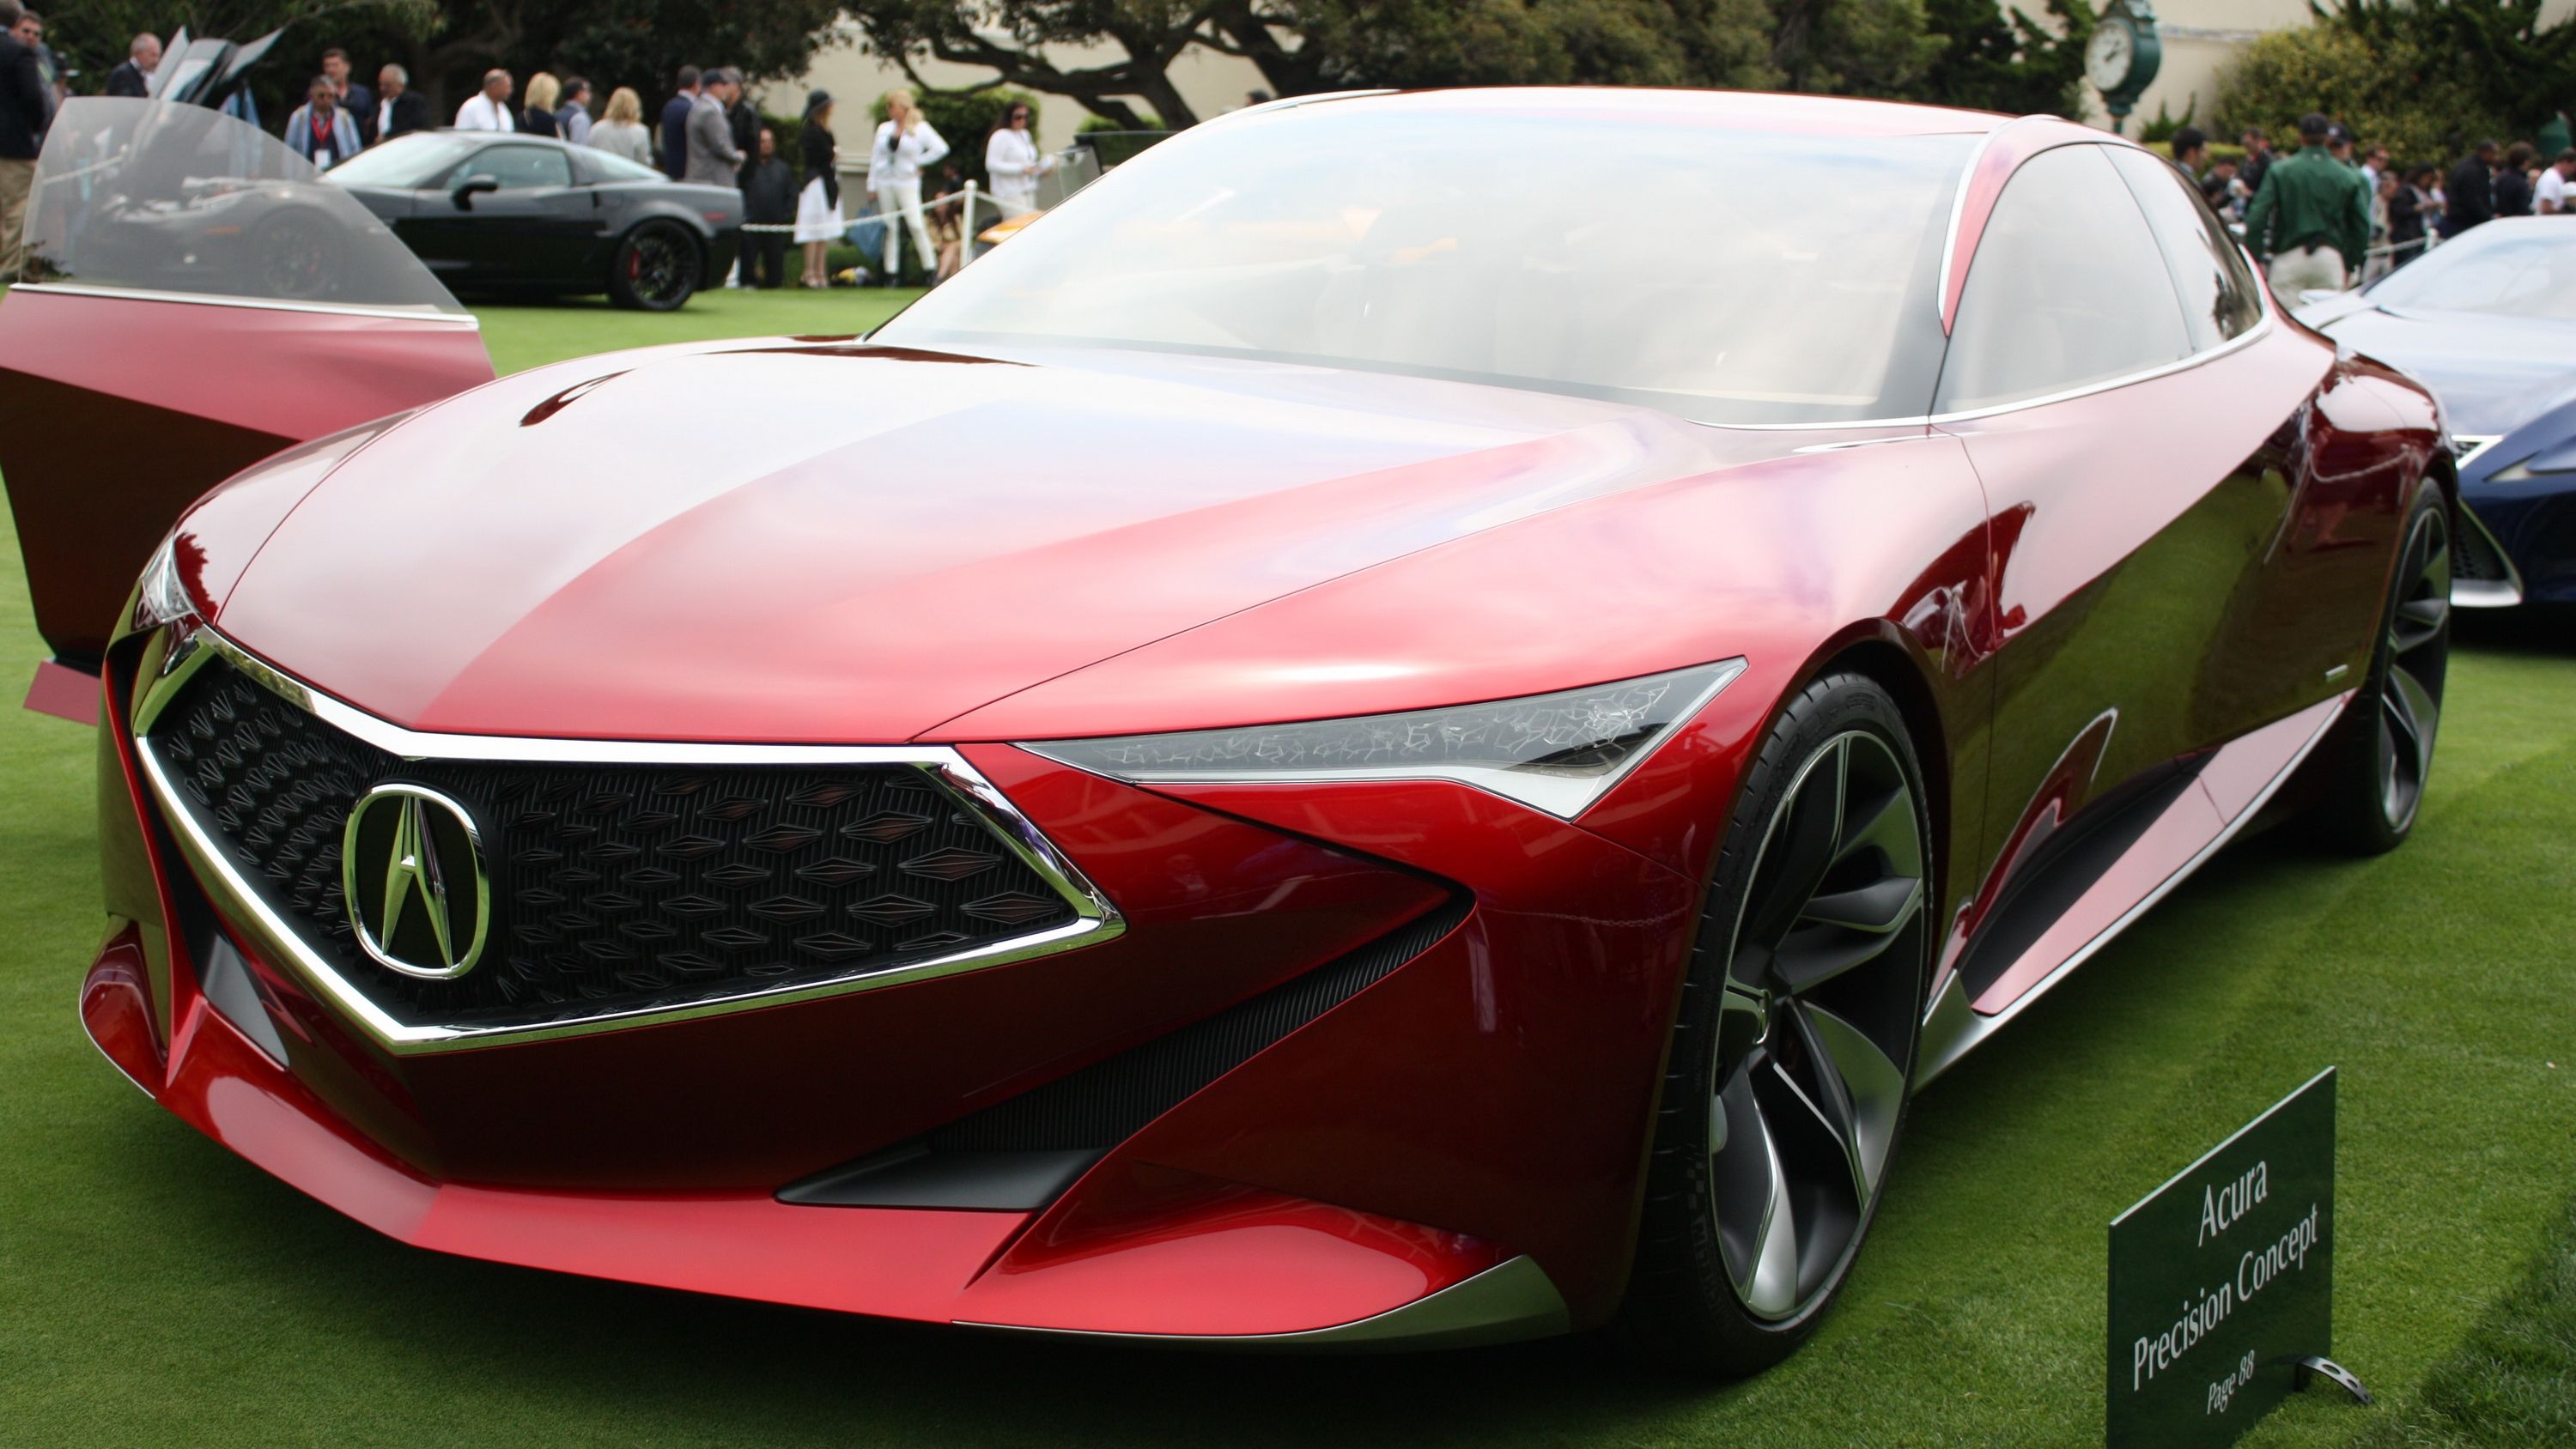 2019 Acura Could Resurrect the 